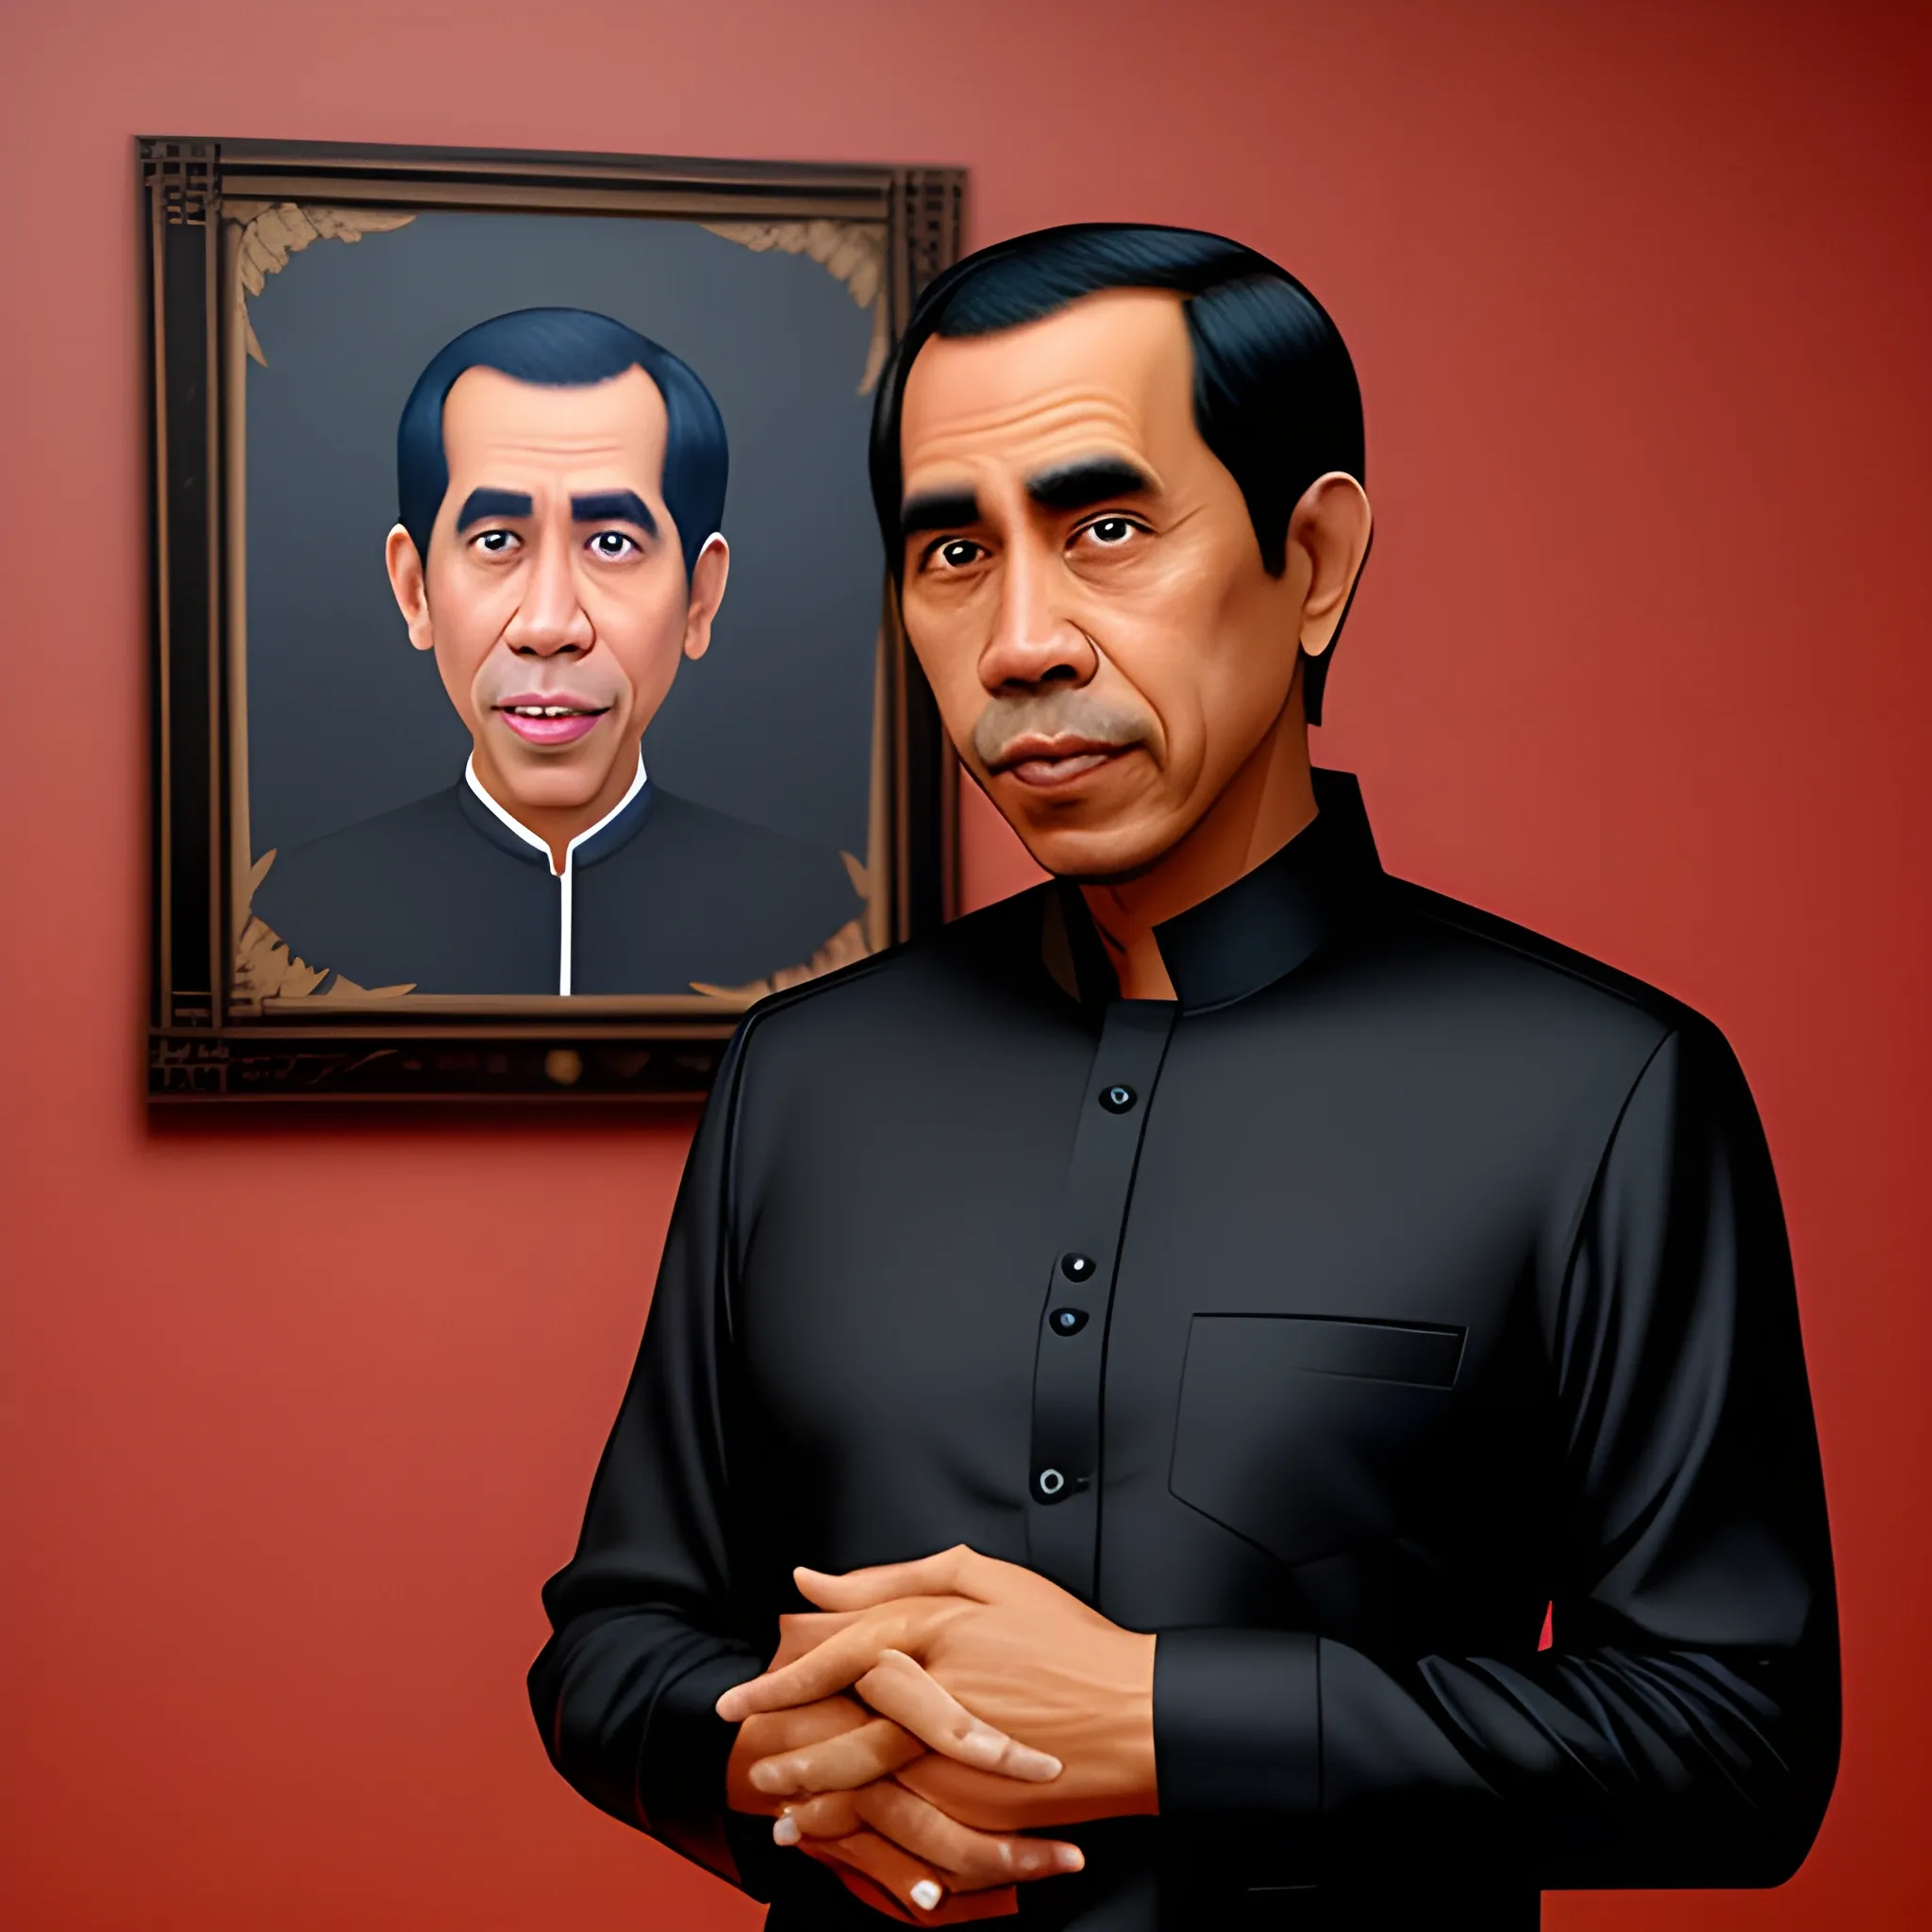 Craft an avatar that embodies the youthful demeanor of Jokowi's face on a young boy's avatar, placed within a room and gazing at the camera. Outfit him in traditional-inspired attire, and render the image using the artistic style of Pixar, with an aspect ratio of 9:16.